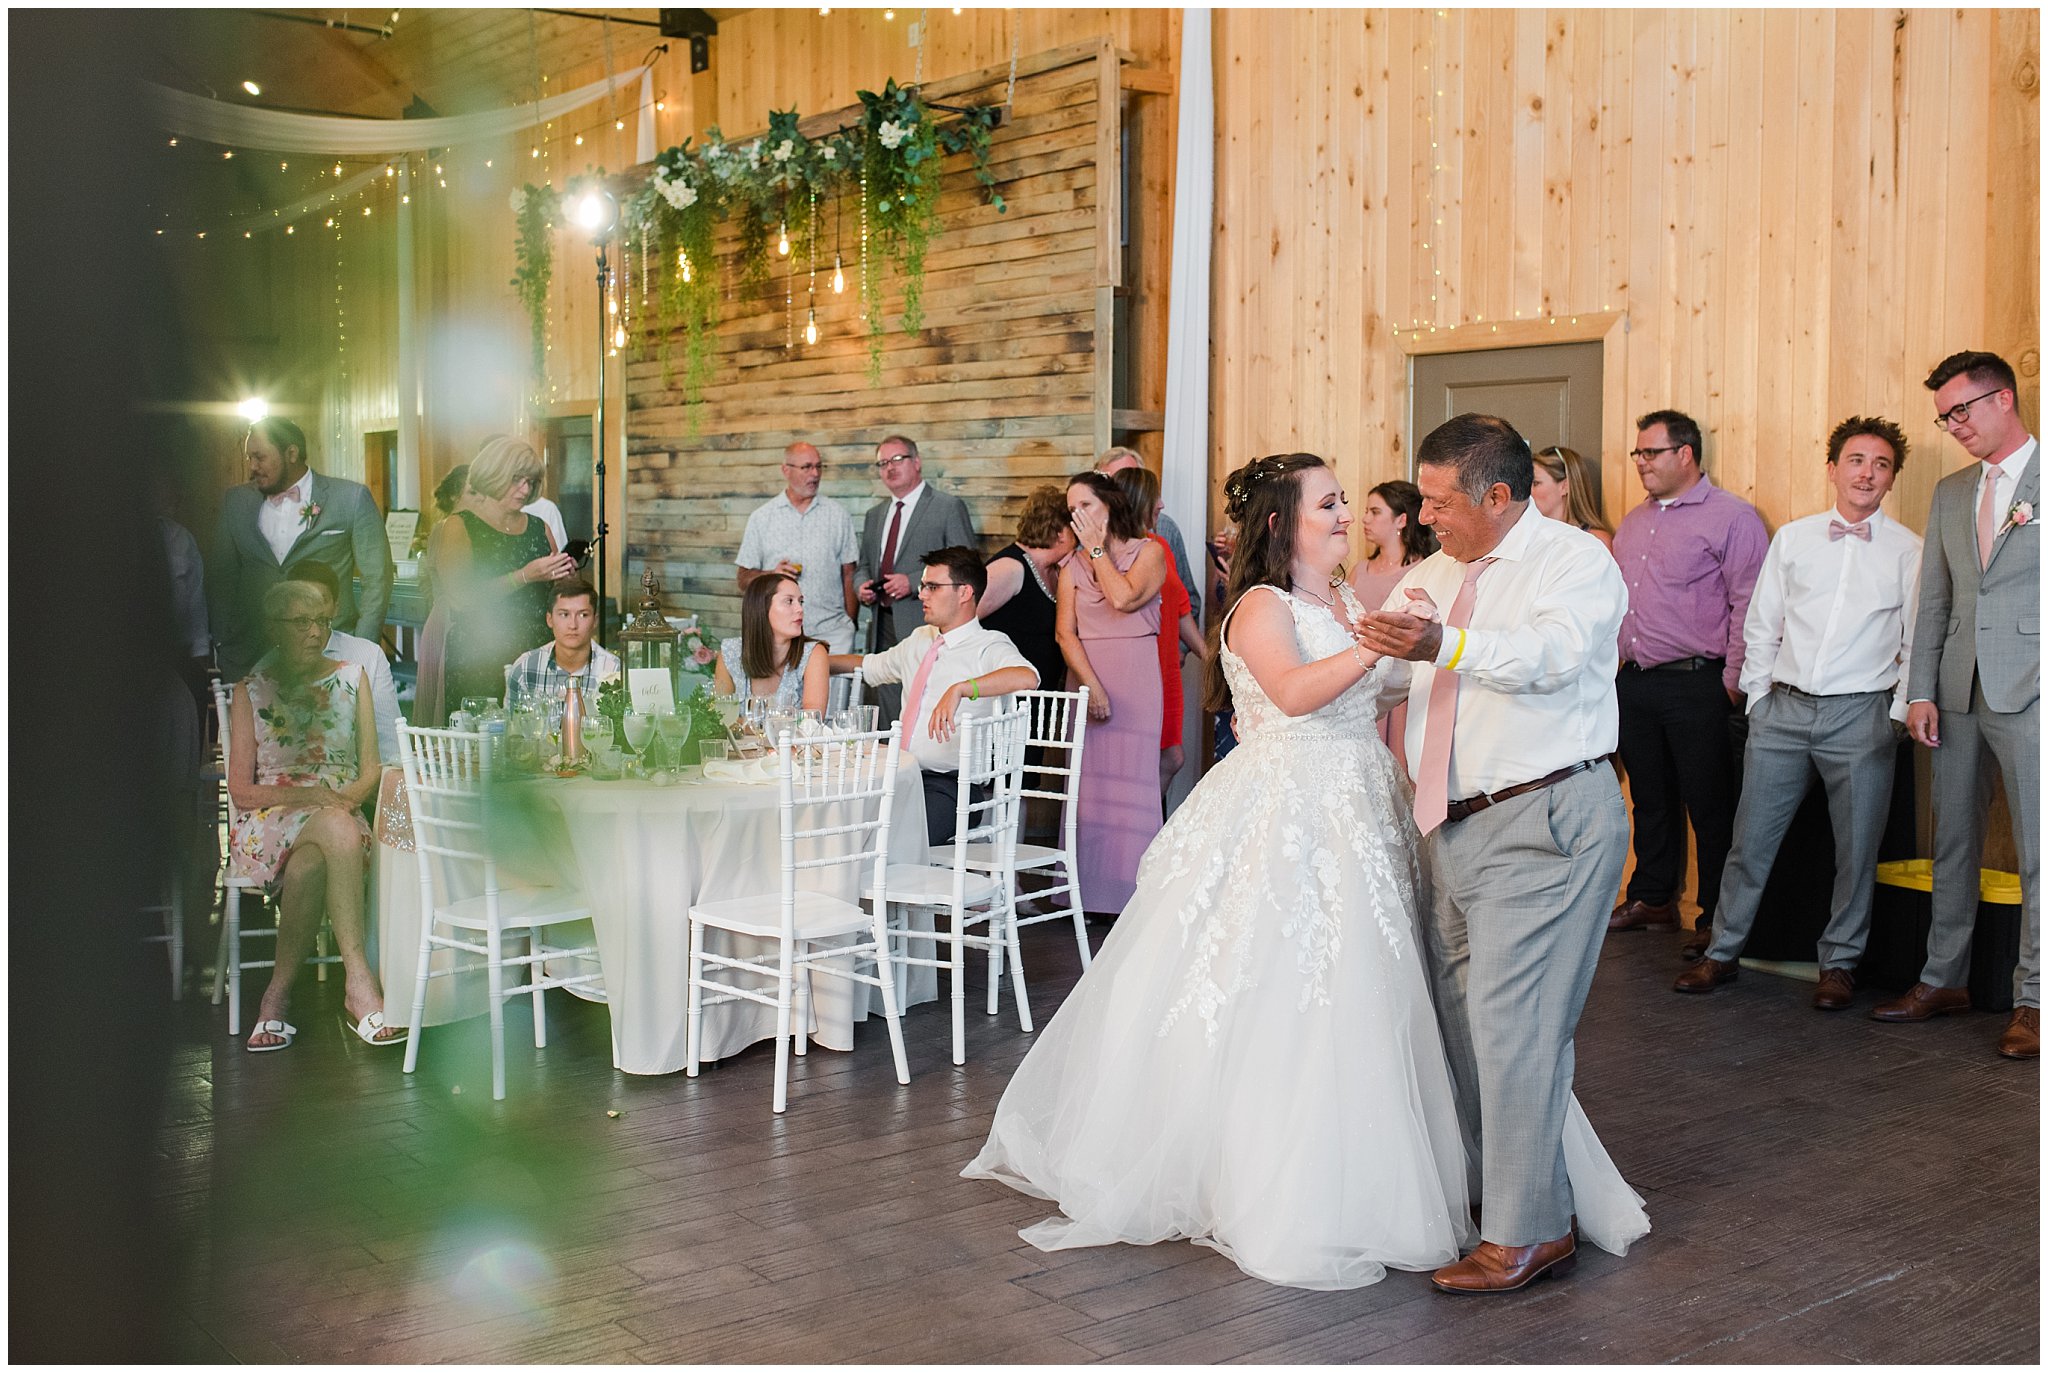 Father daughter dance in barn | Oak Hills Utah Dusty Rose and Gray Summer Wedding | Jessie and Dallin Photography